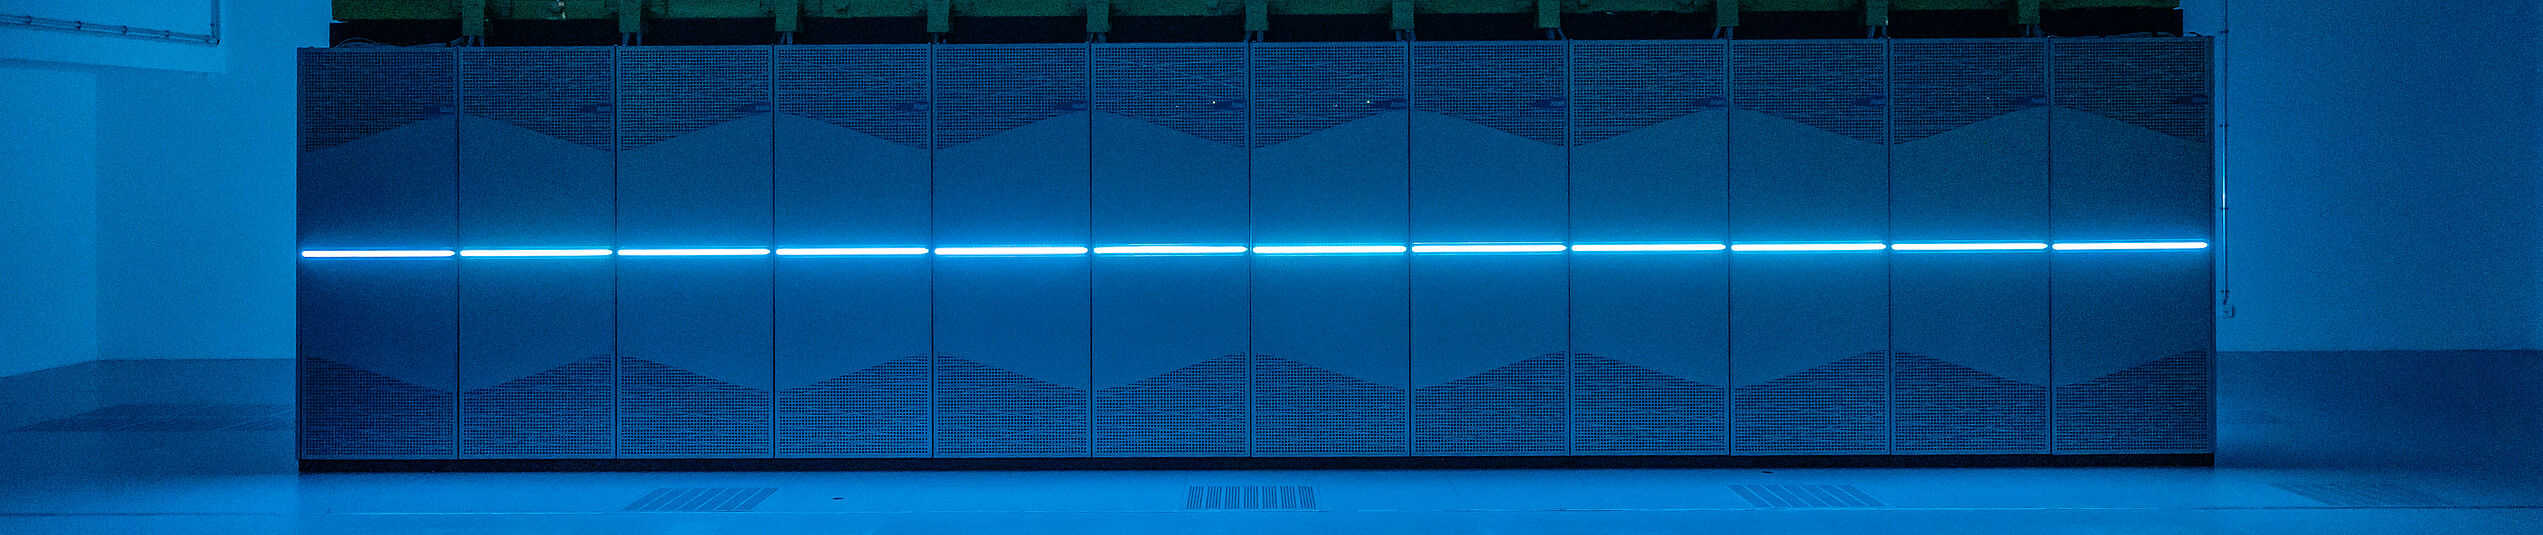 The PC2's Noctua 2 supercomputer in Building X, the center-mounted LED line lighting of the individual server cabinets bathes the room in blue light